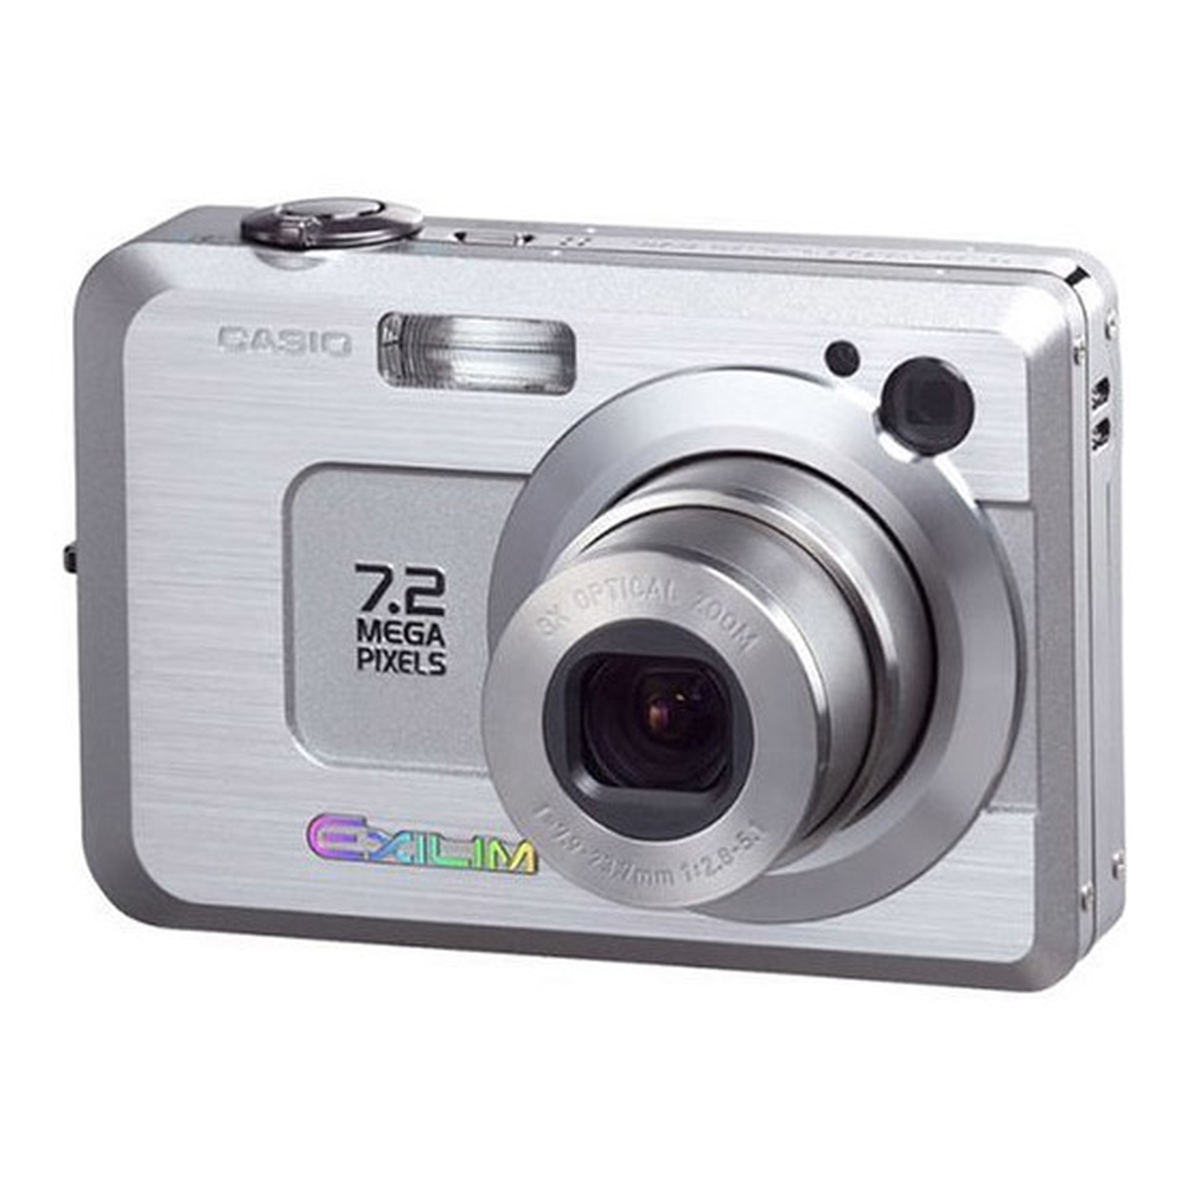 Casio Exilim EX-Z750 : Specifications and Opinions | JuzaPhoto